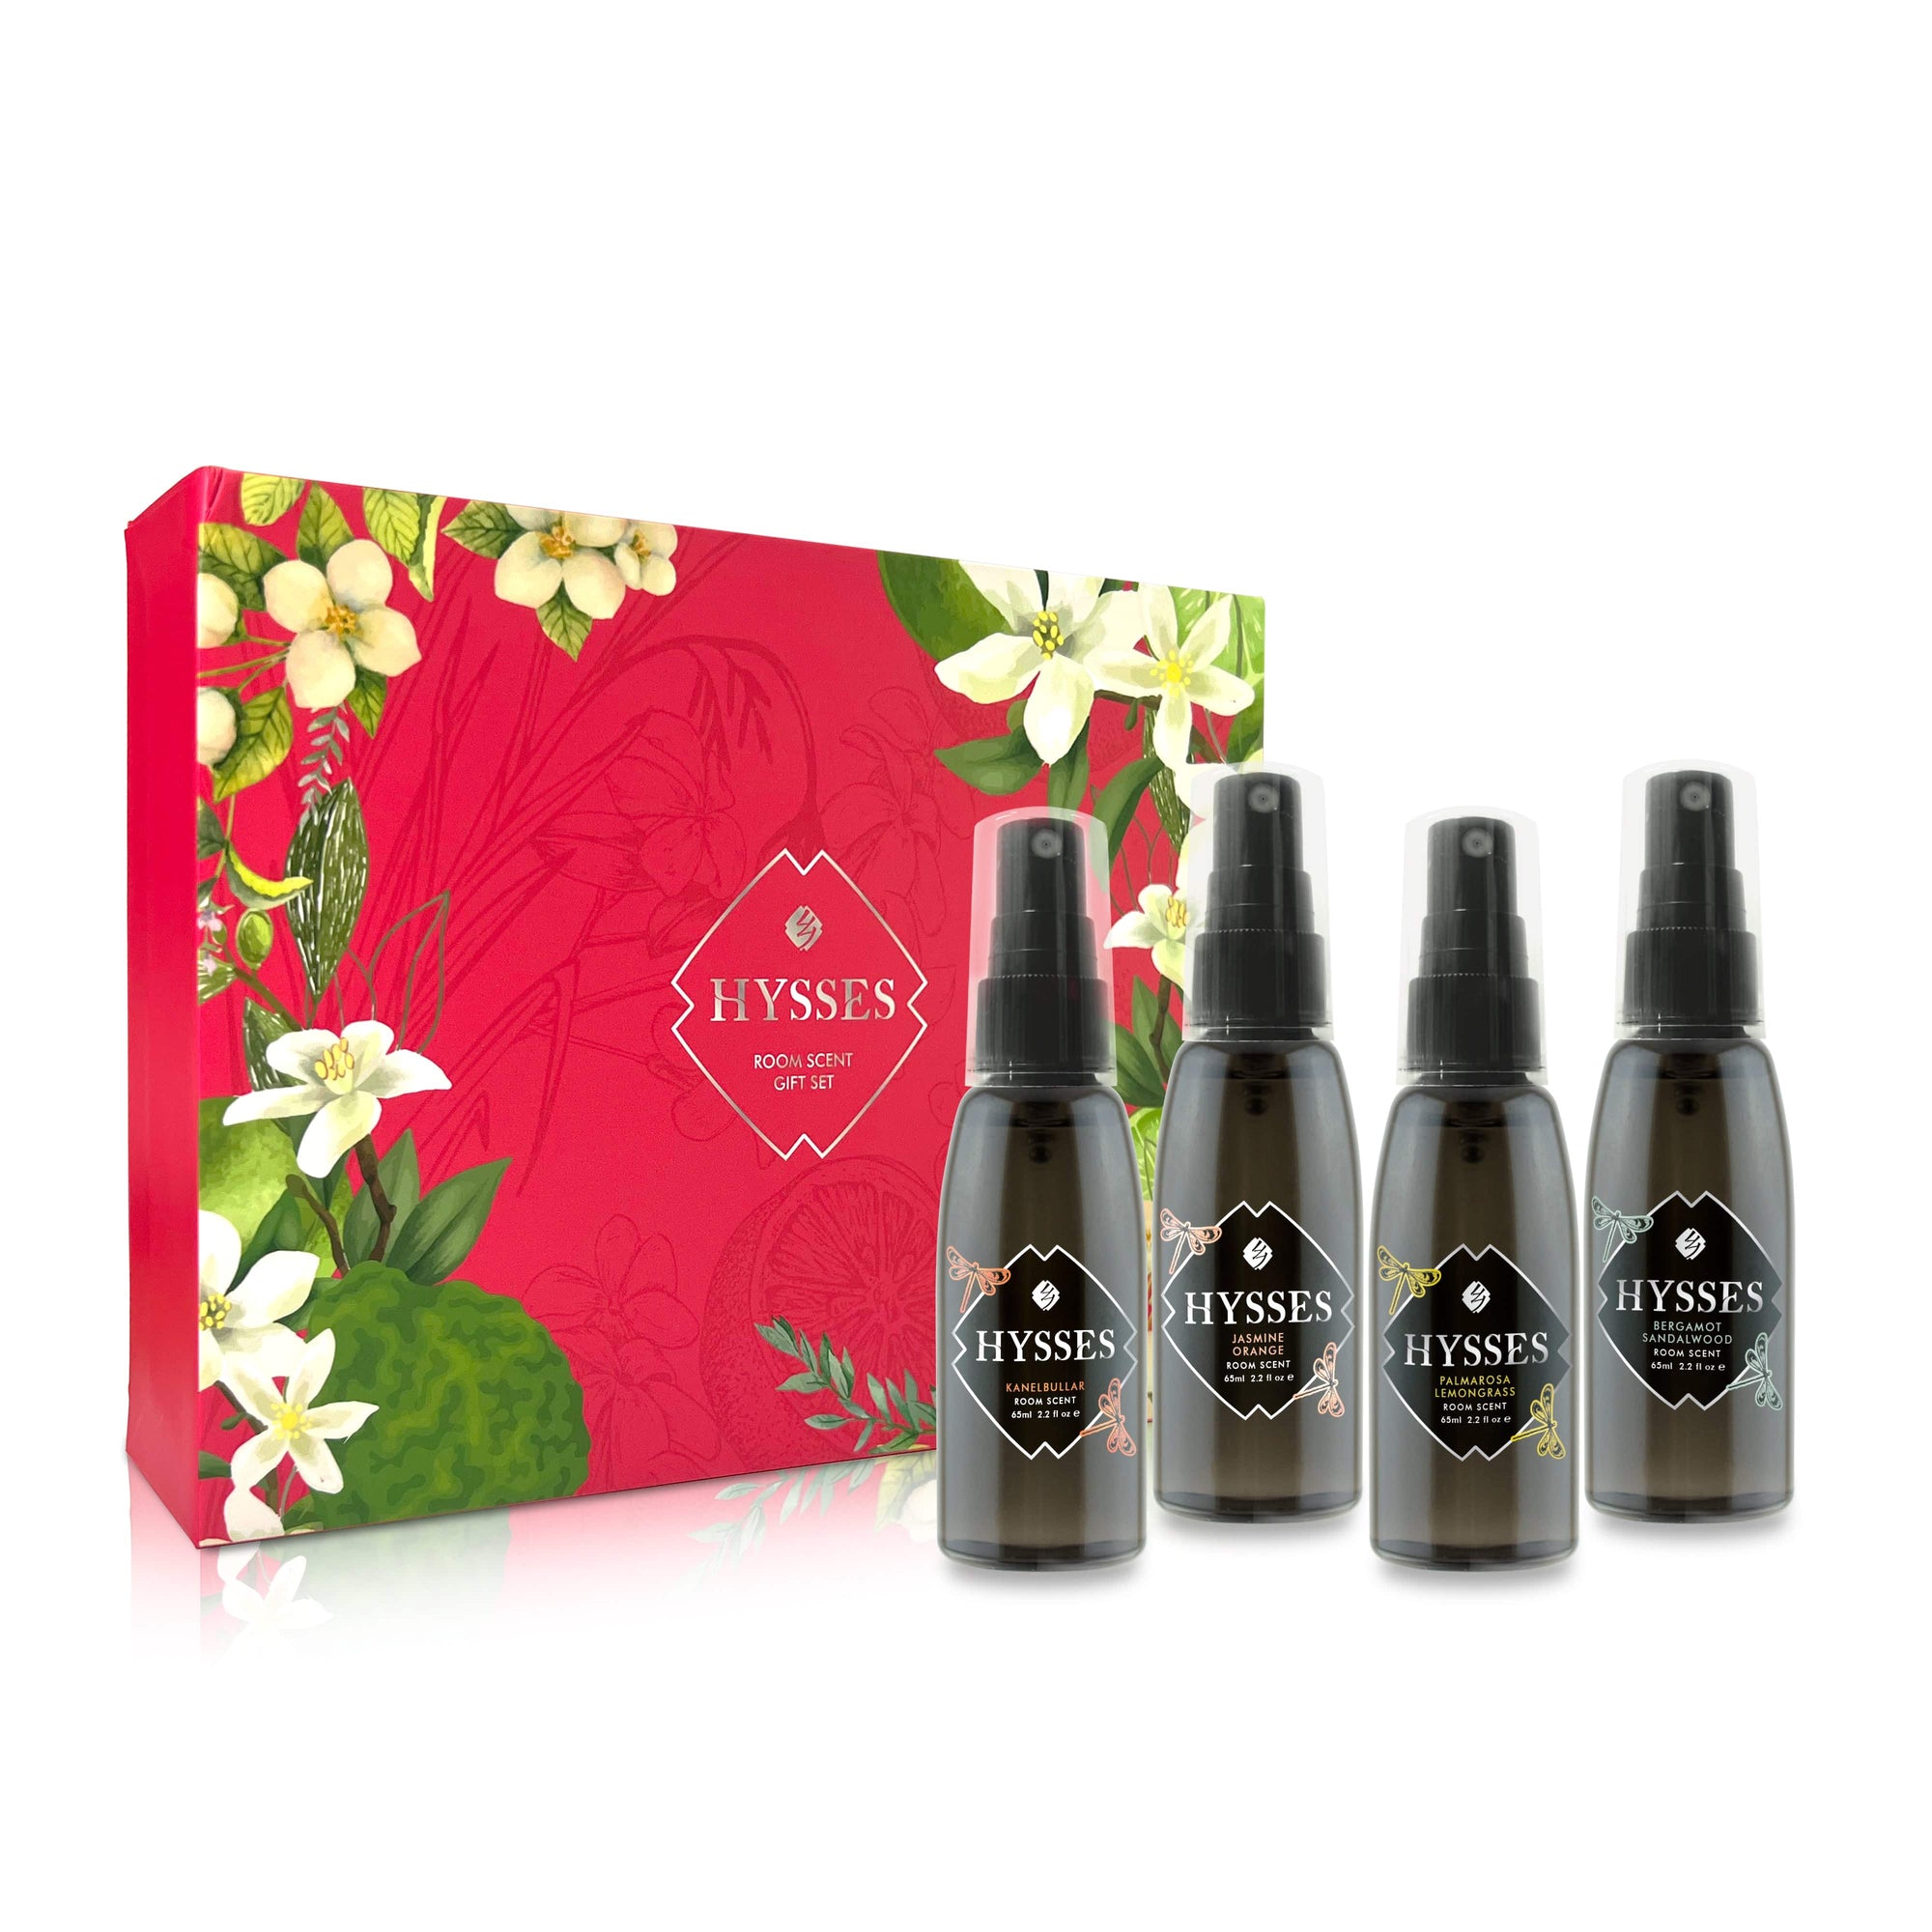 Hysses Home Scents Room Scent Gift Set of 4, Christmas Limited Ed.